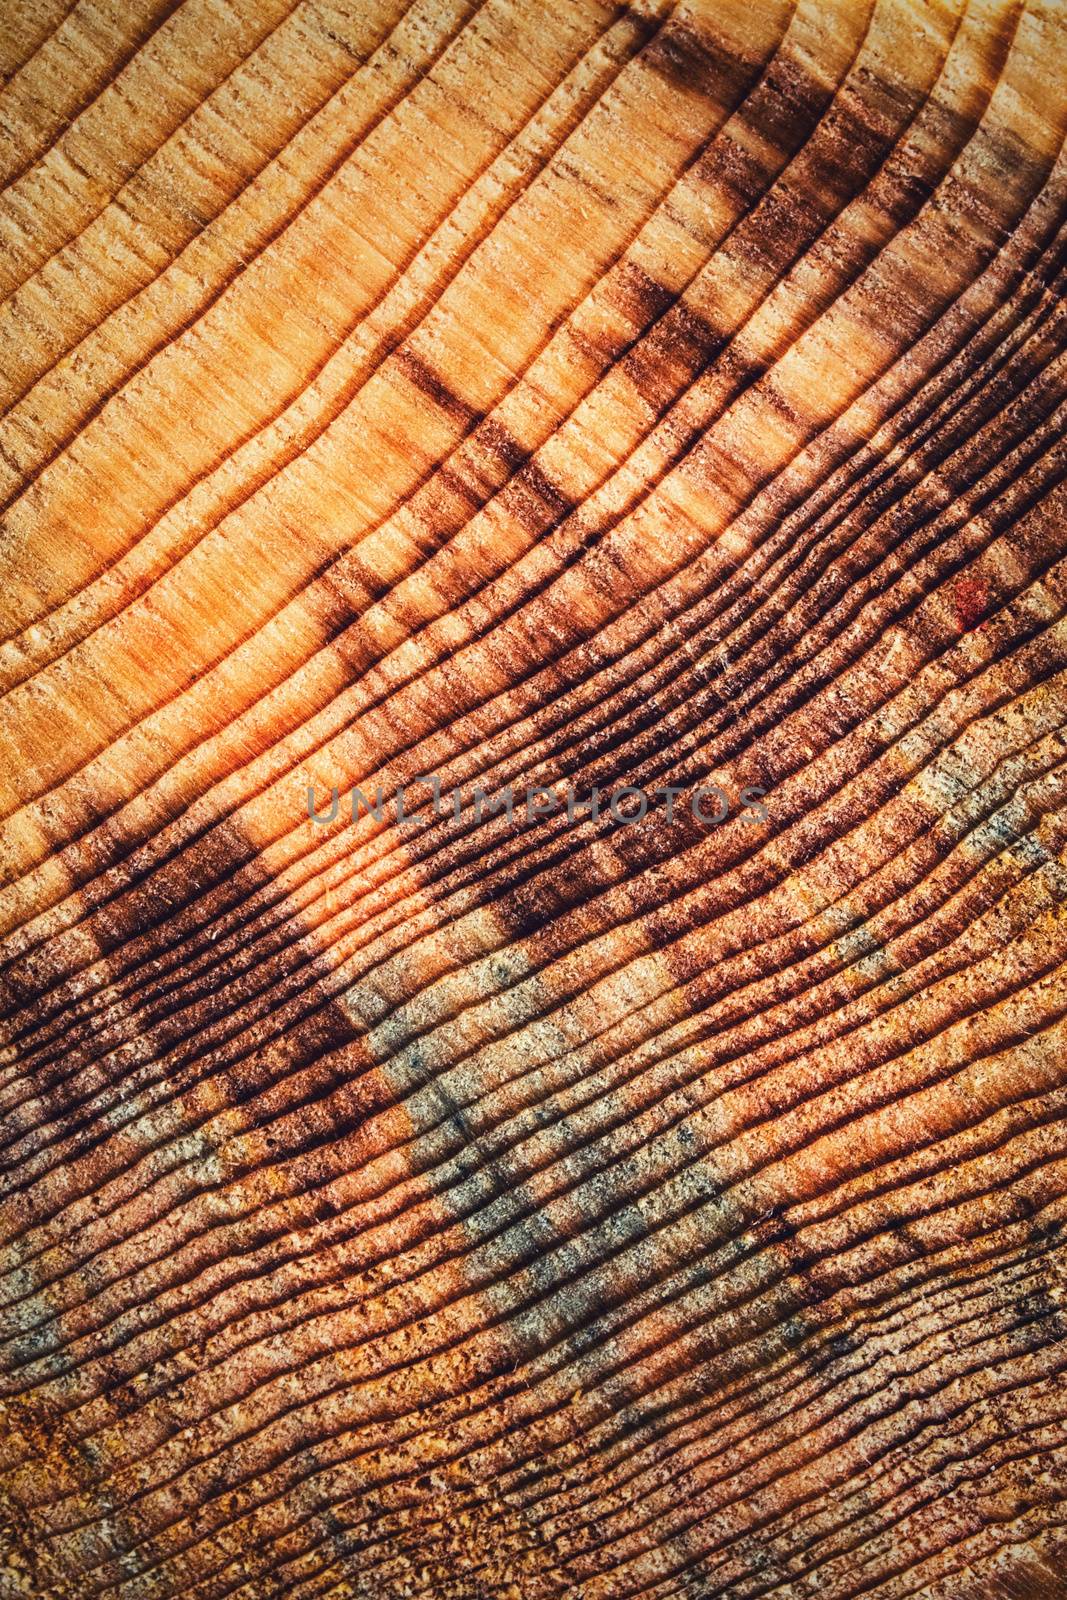 cut with tree rings detail on old wood by Ahojdoma